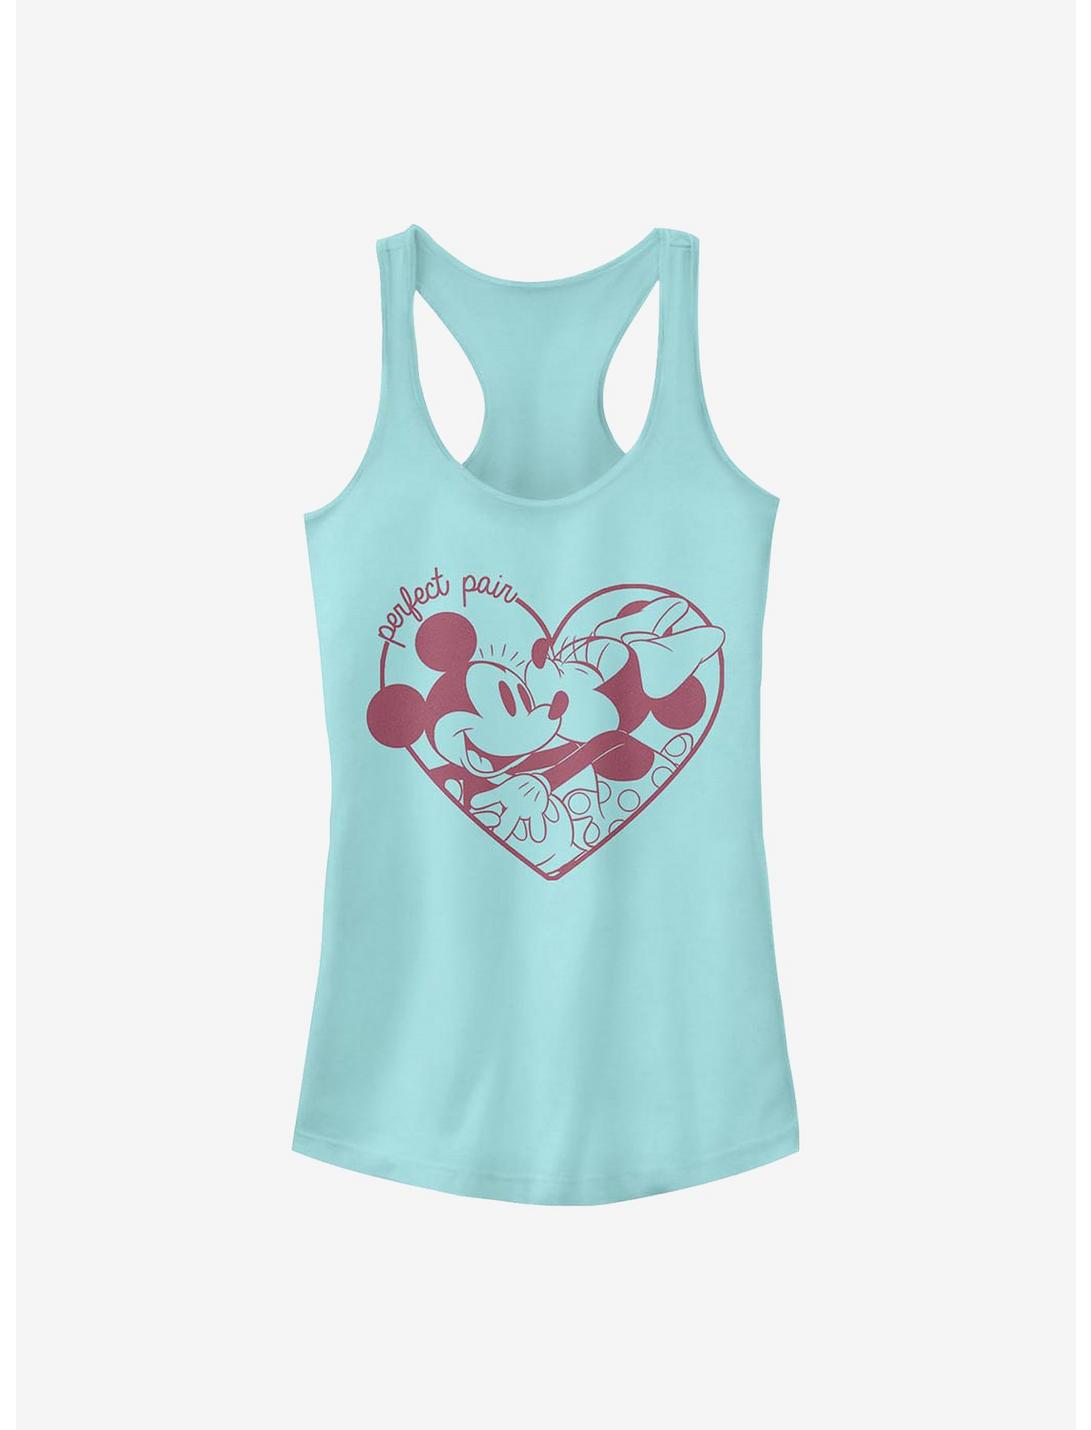 Disney Mickey Mouse & Minnie Mouse Perfect Pair Girls Tank Top, CANCUN, hi-res